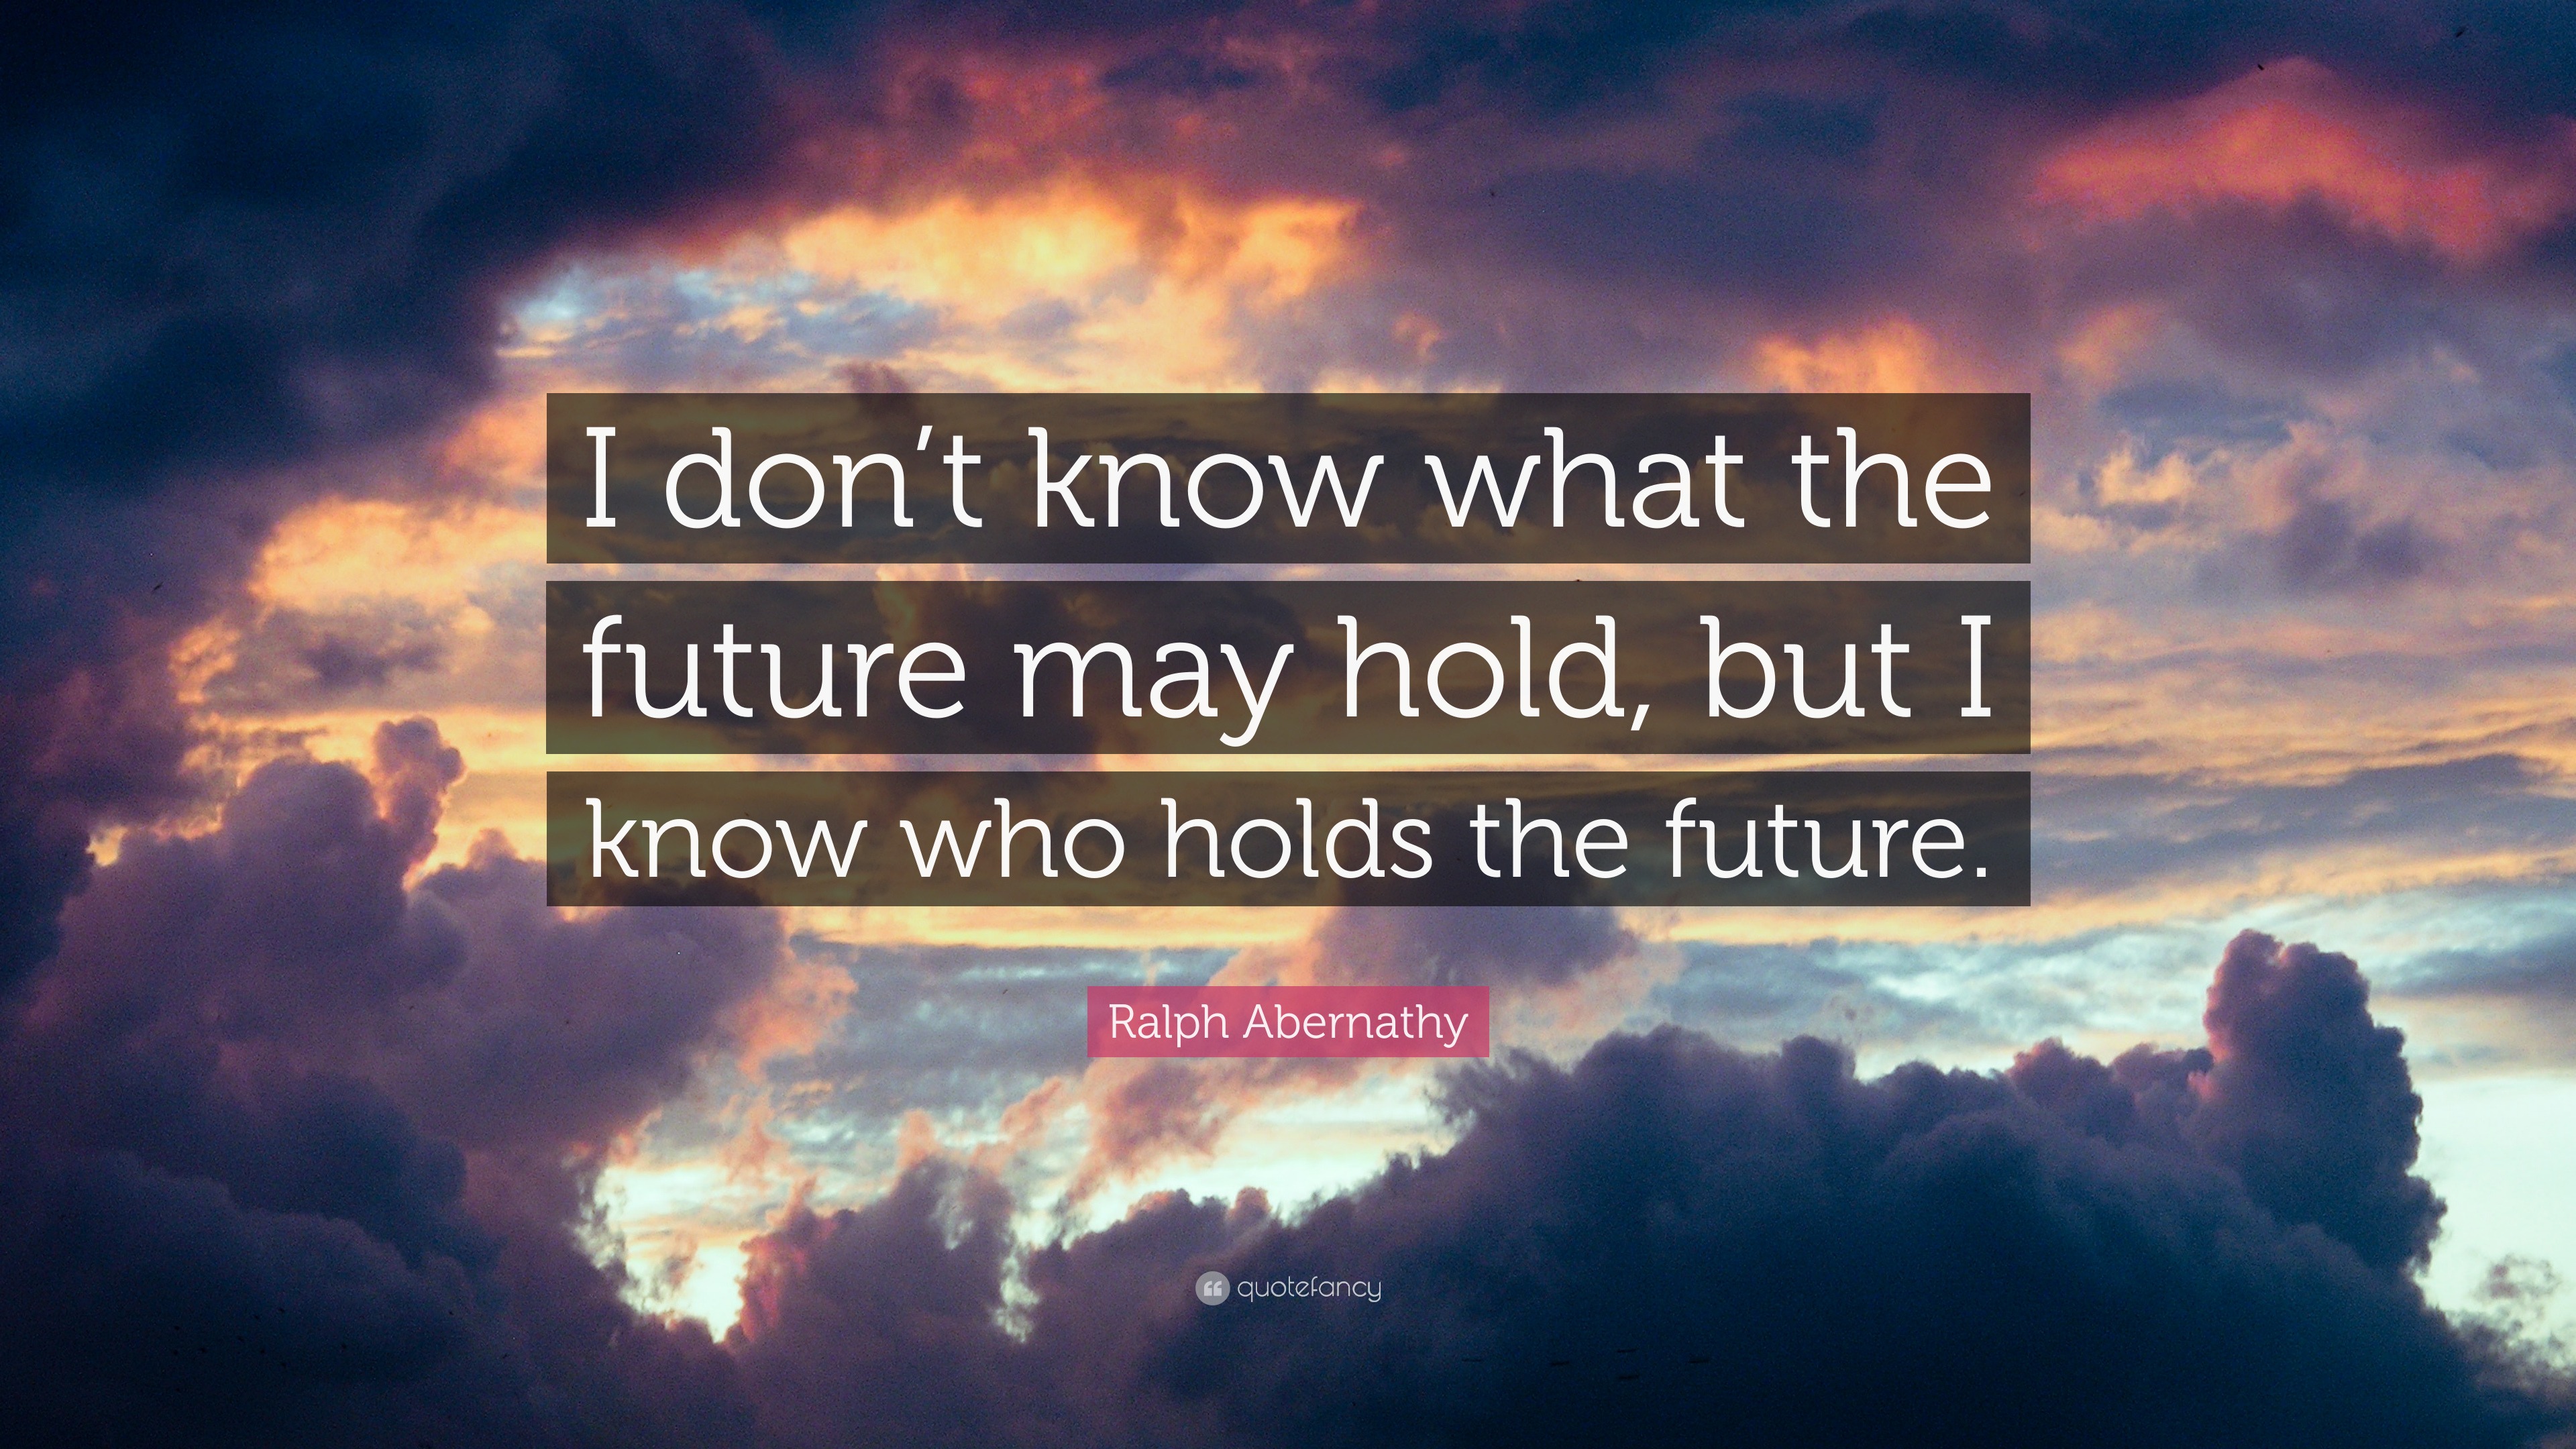 Ralph Abernathy Quote: "I don't know what the future may ...